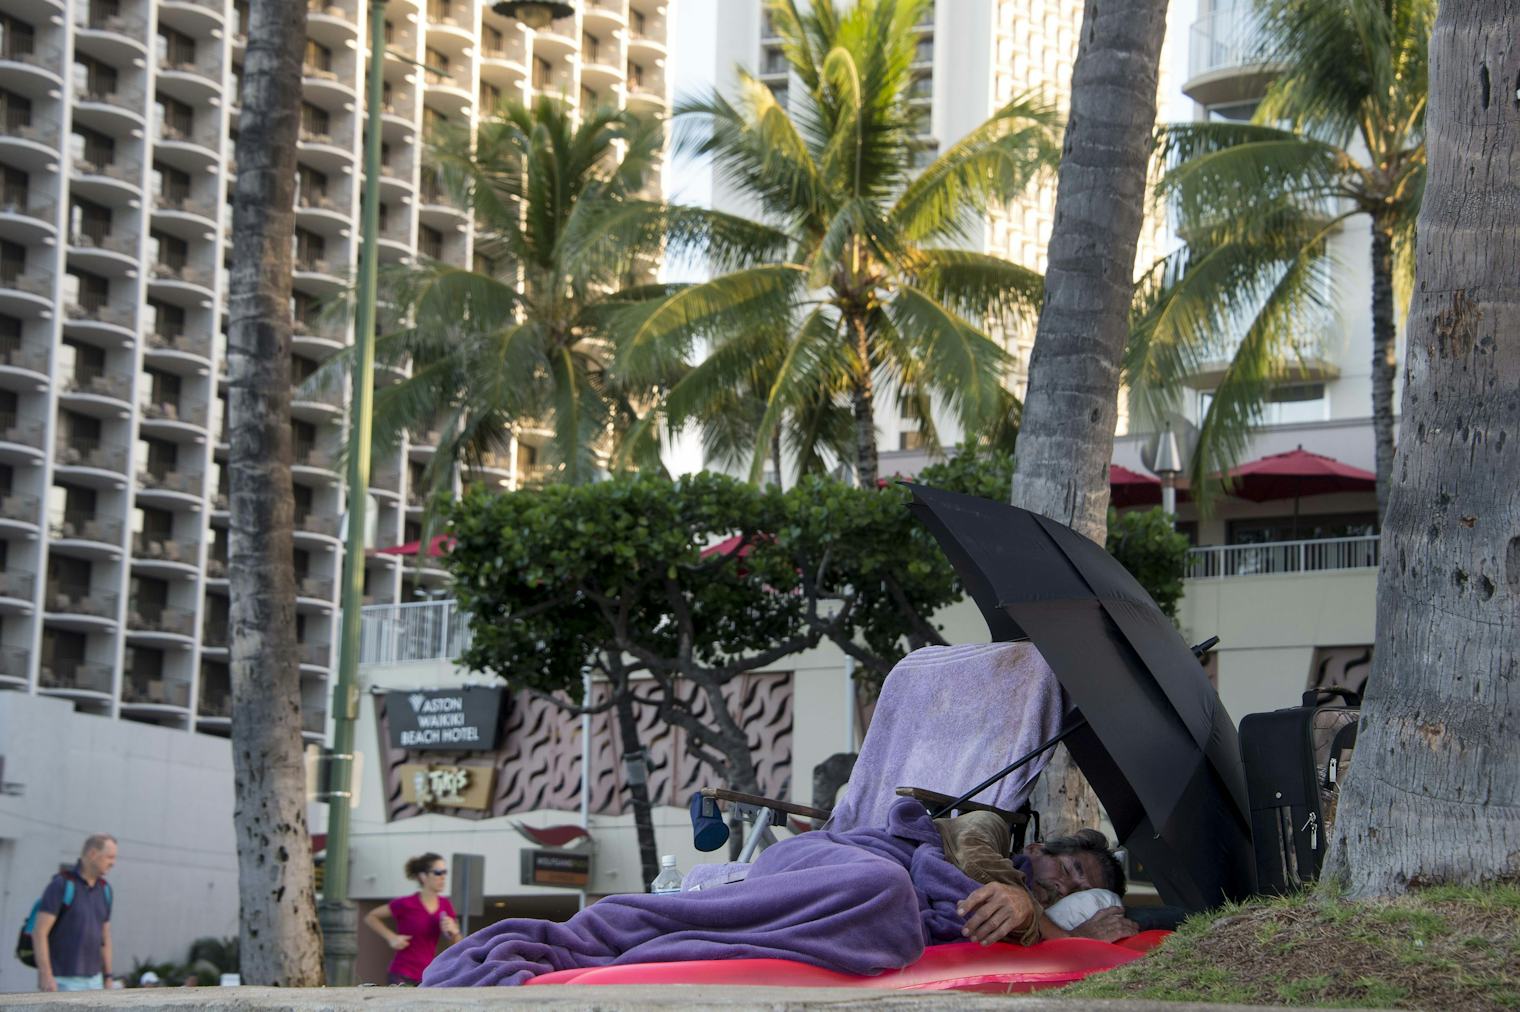 Why Is Hawaii's Homeless Population So High? The Governor Declared A